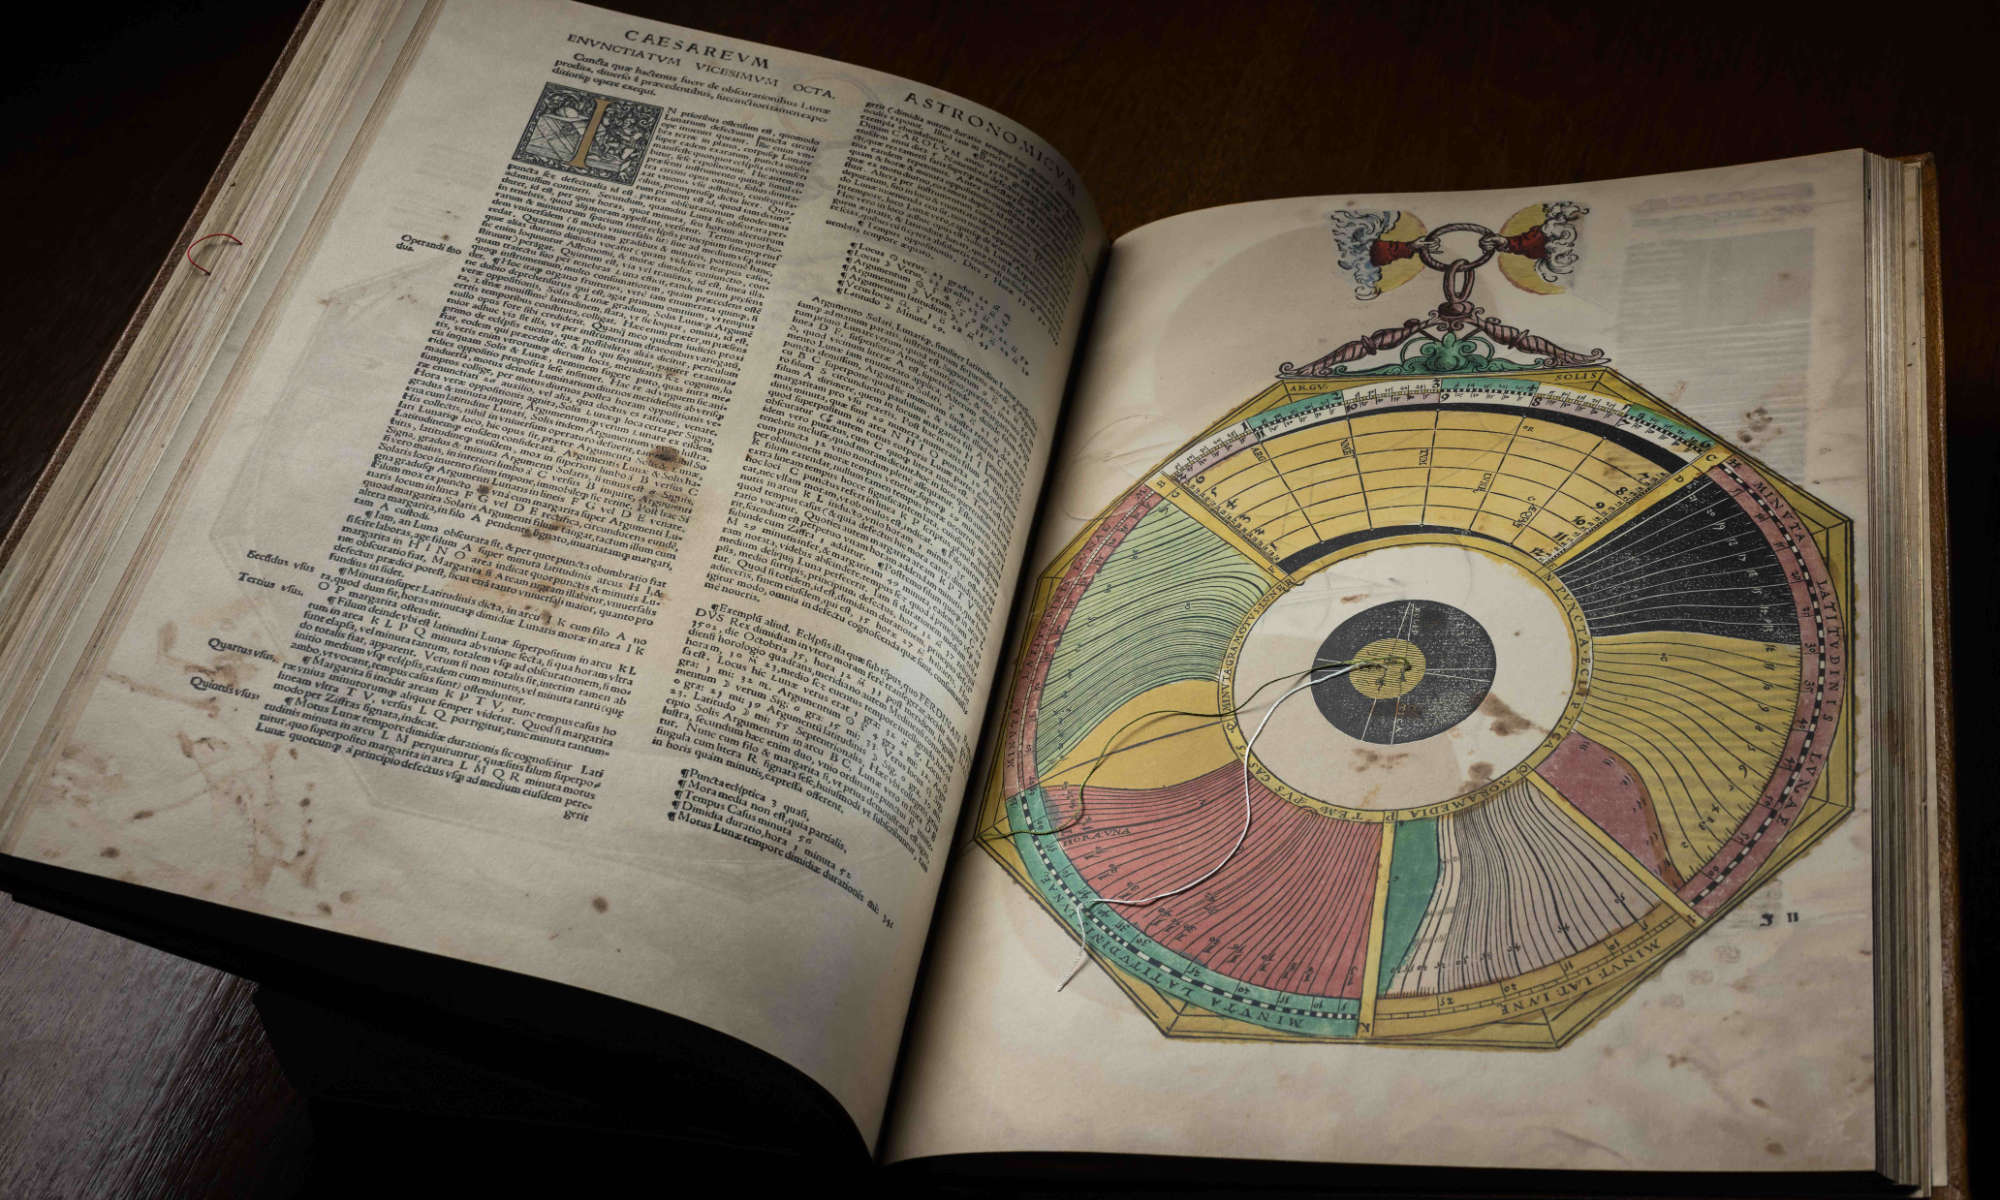 A facsimile of “Astronomicum Caesaream” by Petrus Apianus opened to a spread that shows lots of text on the left page and a colorful compass-like illustration on the right.